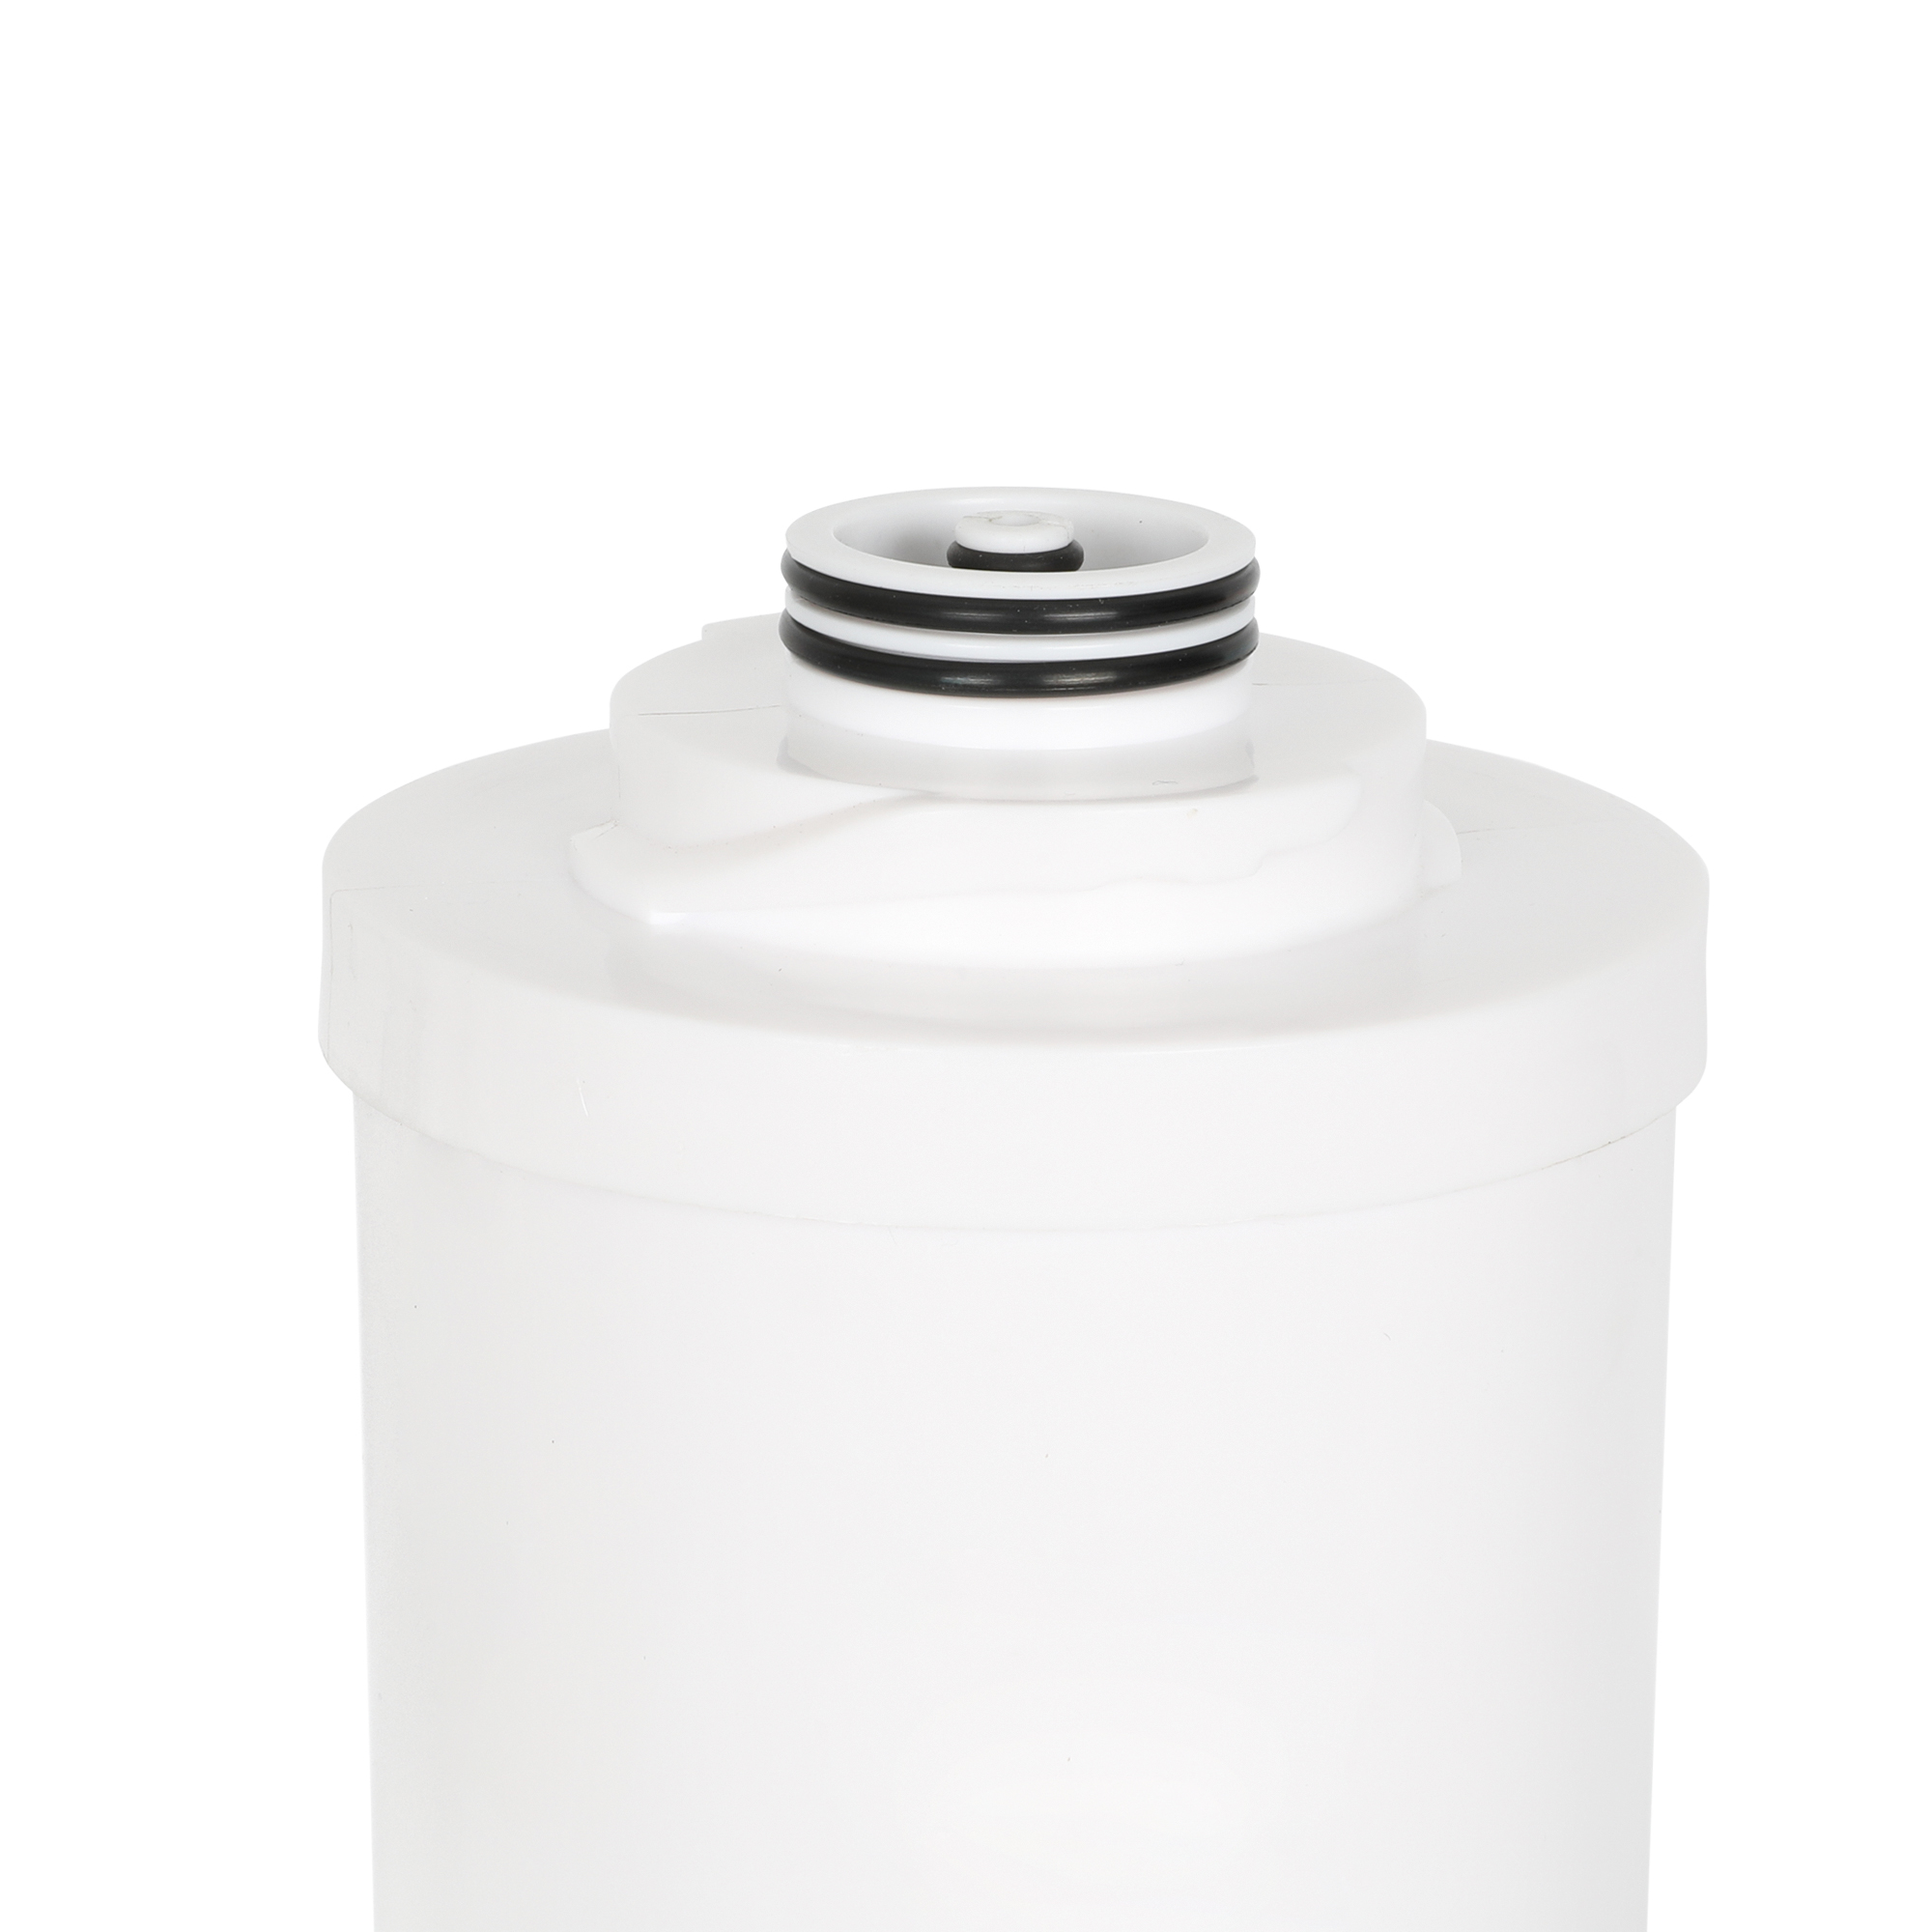 https://www.filterpur.com/ro-membrane-600g800g-quick-locking-filter-for-under-sink-water-purifier-product/